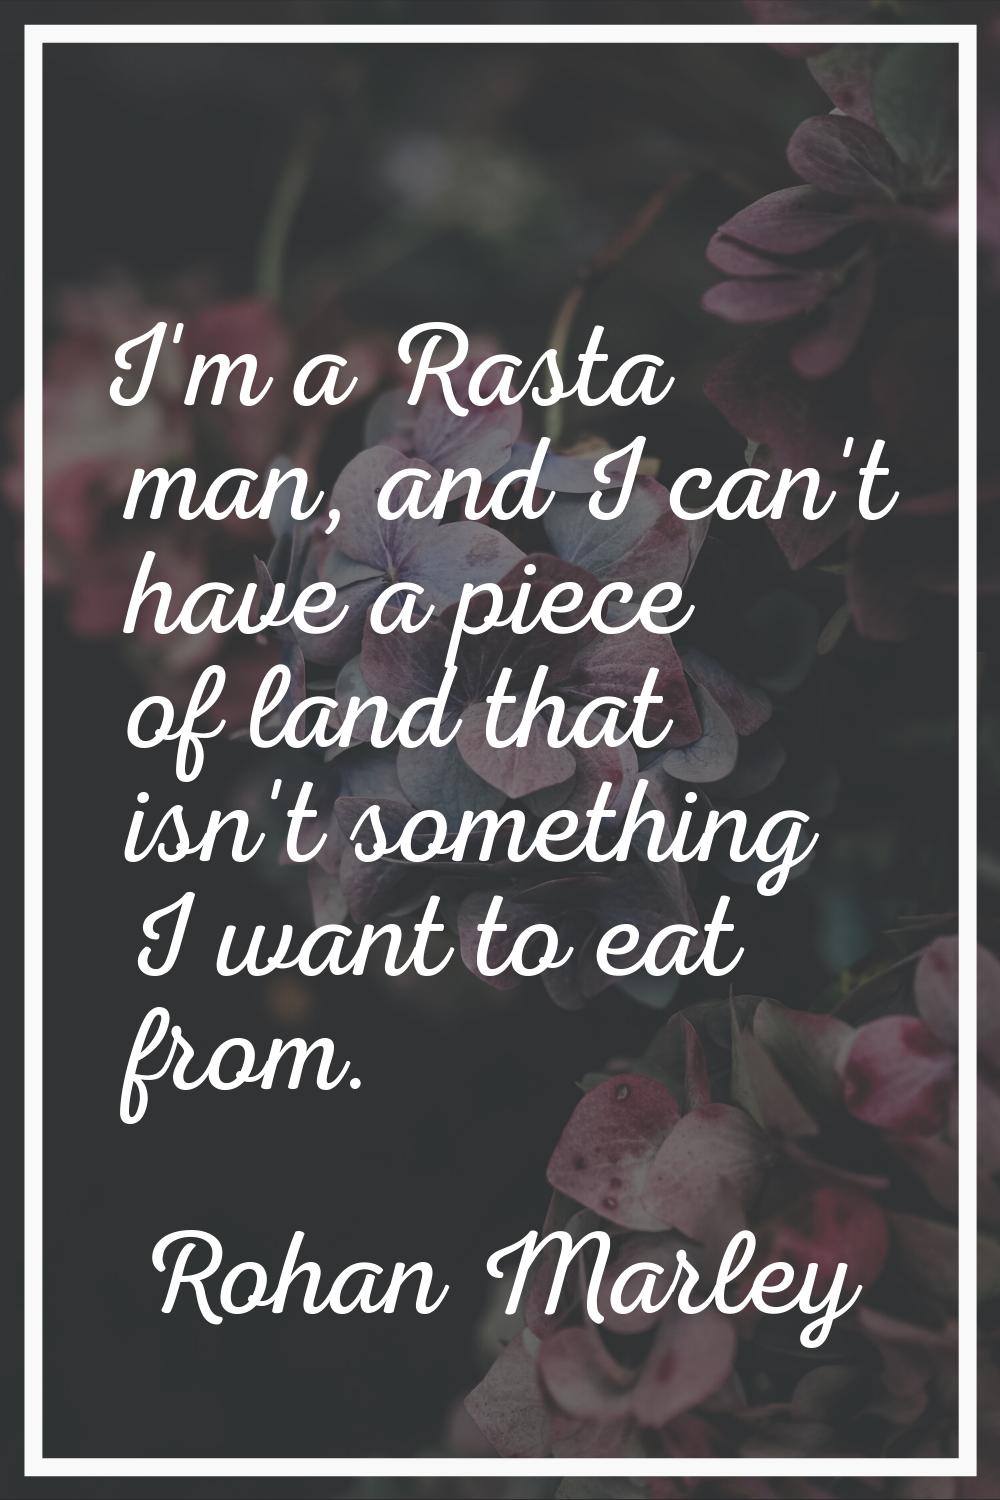 I'm a Rasta man, and I can't have a piece of land that isn't something I want to eat from.